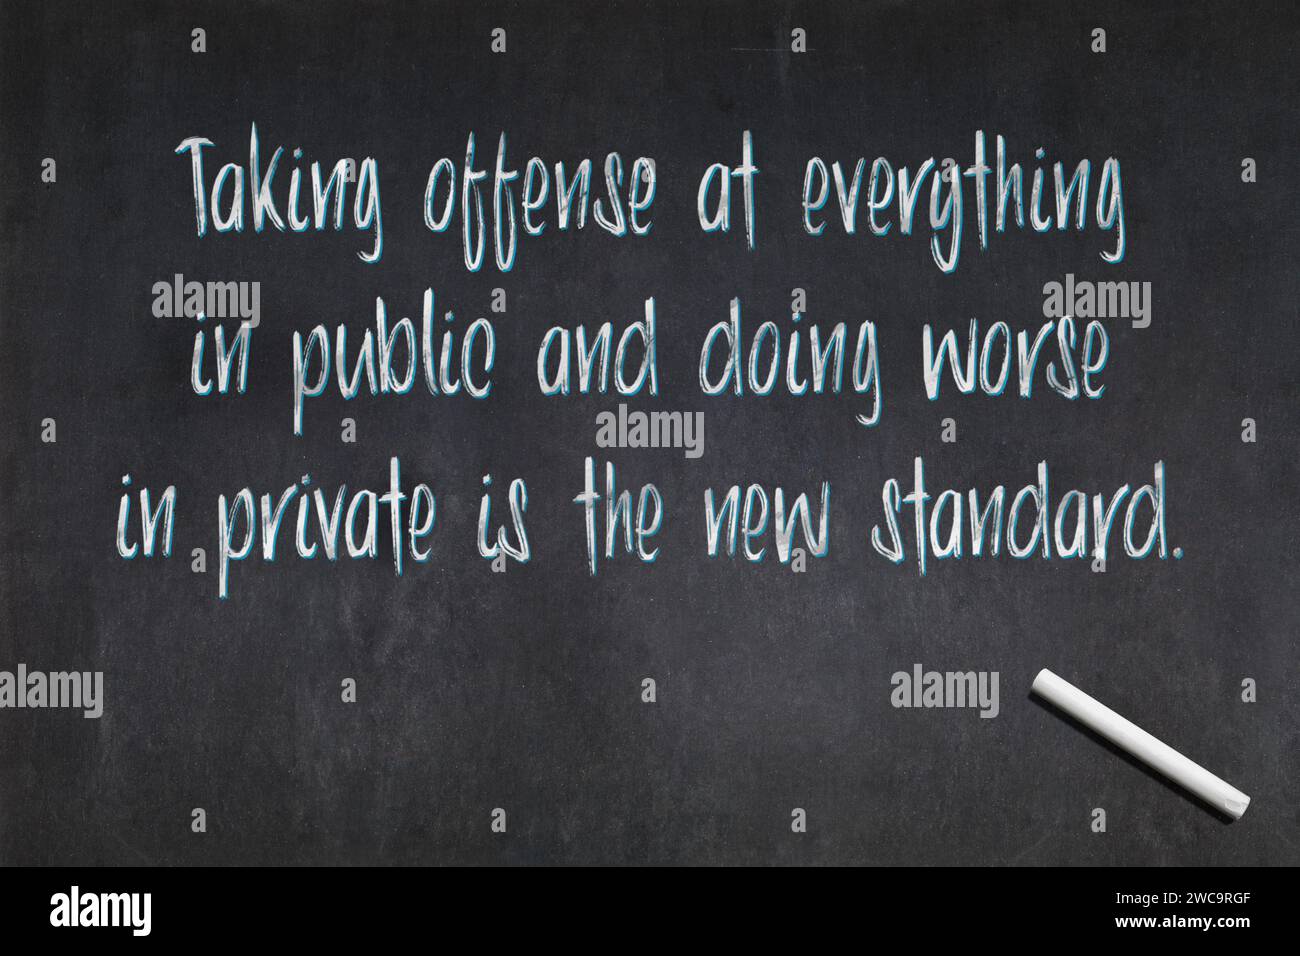 Blackboard with a quote saying 'Taking offense at everything in public and doing worse in private is the new standard.', drawn in the middle. Stock Photo